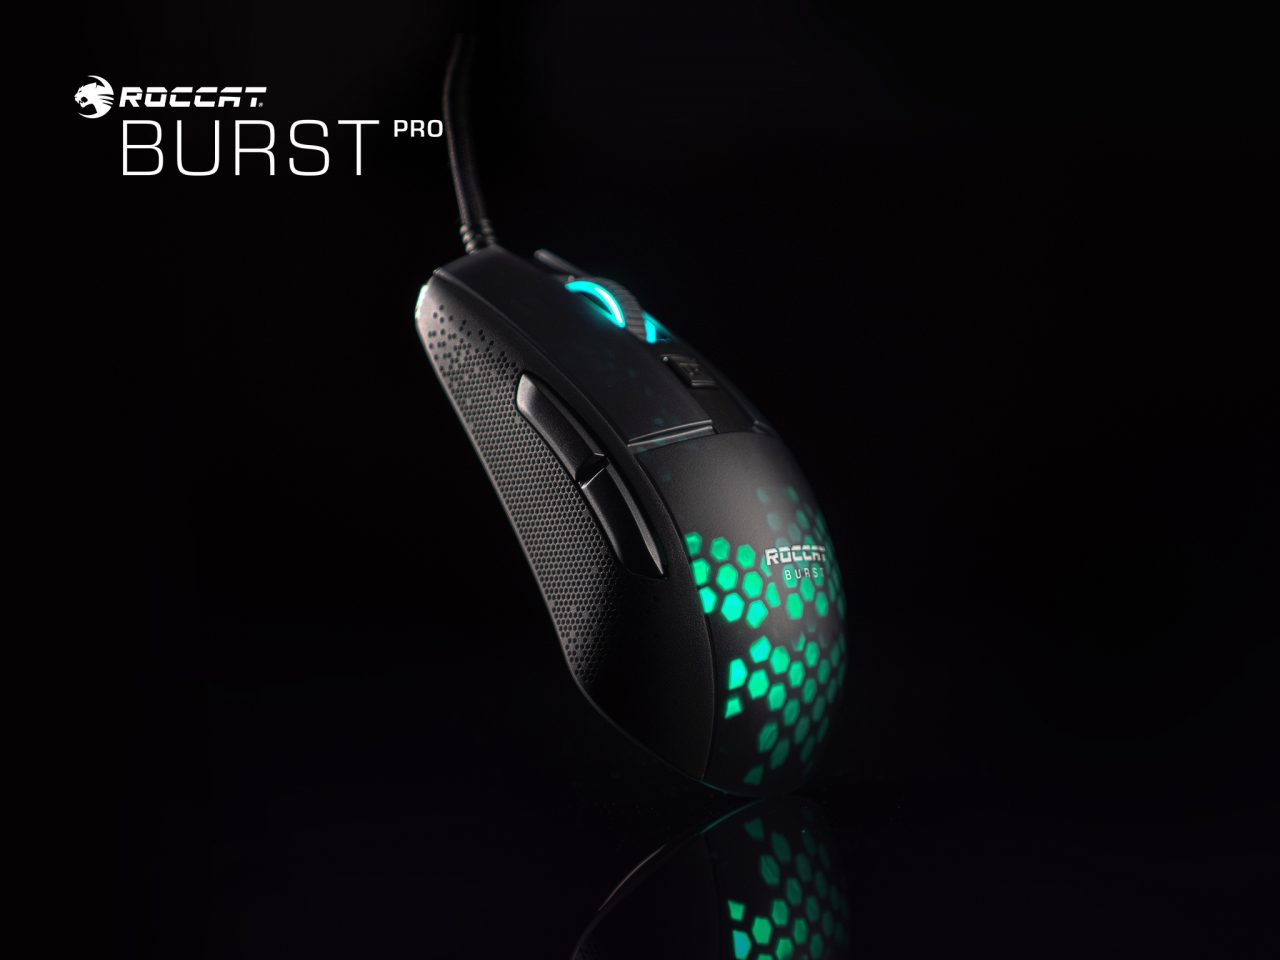 Burst Pro Gaming Mouse (ROCCAT)